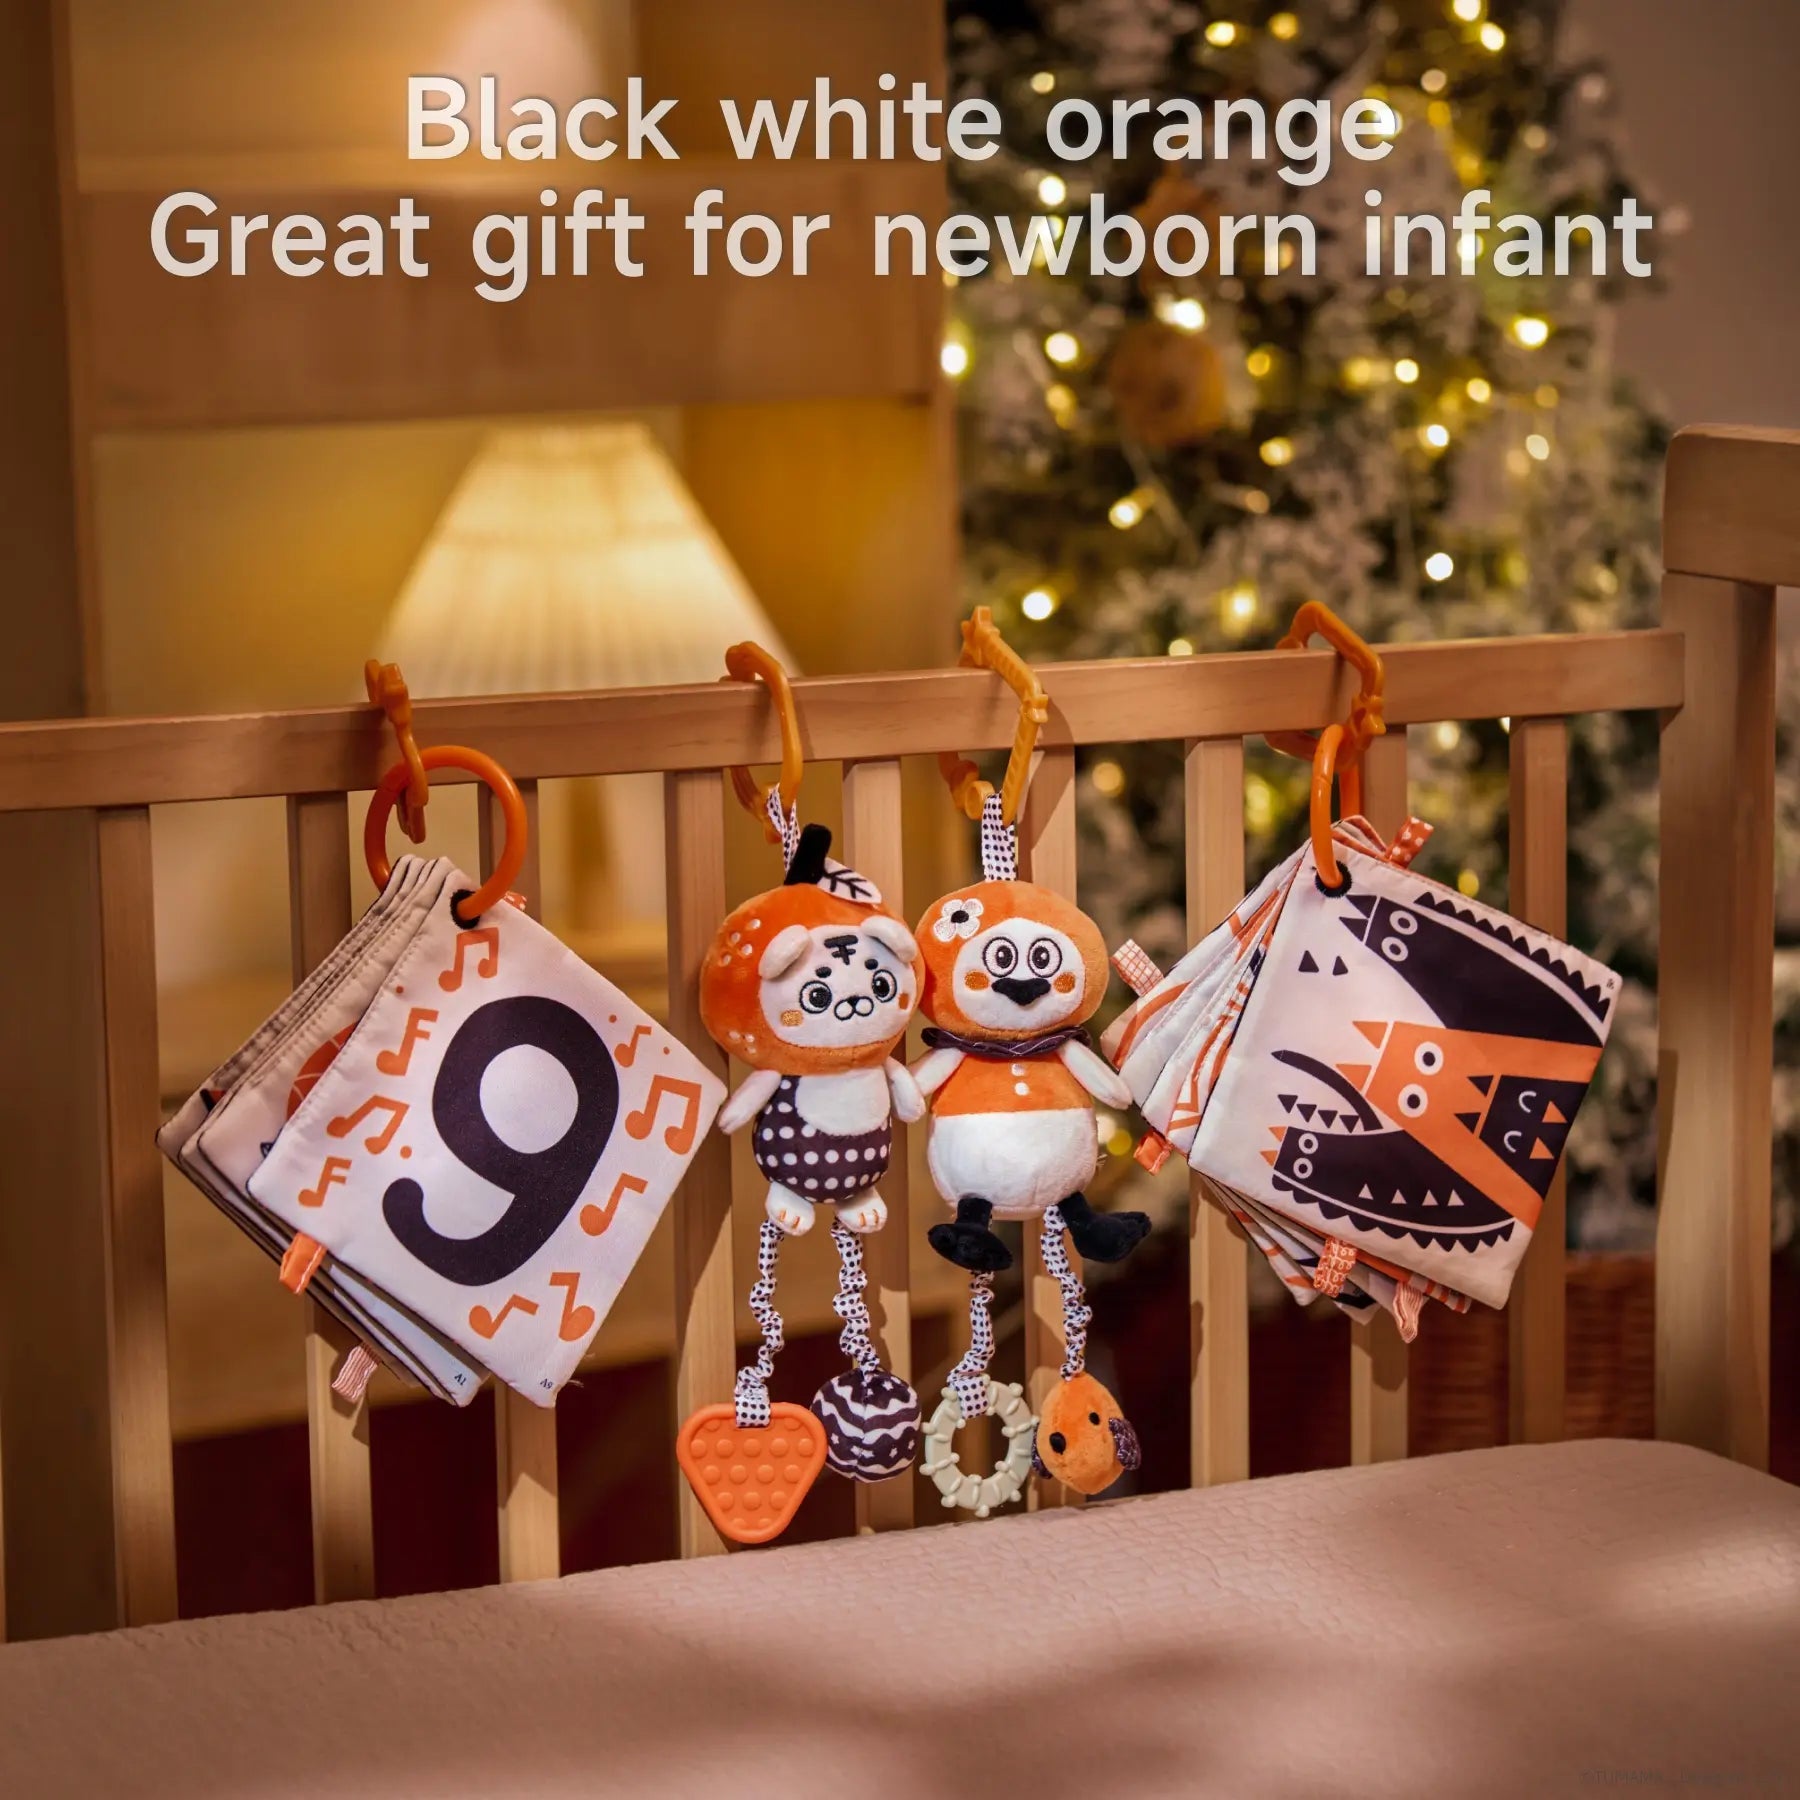 Crinkle flashcards for crib, car seat, and stroller entertainment